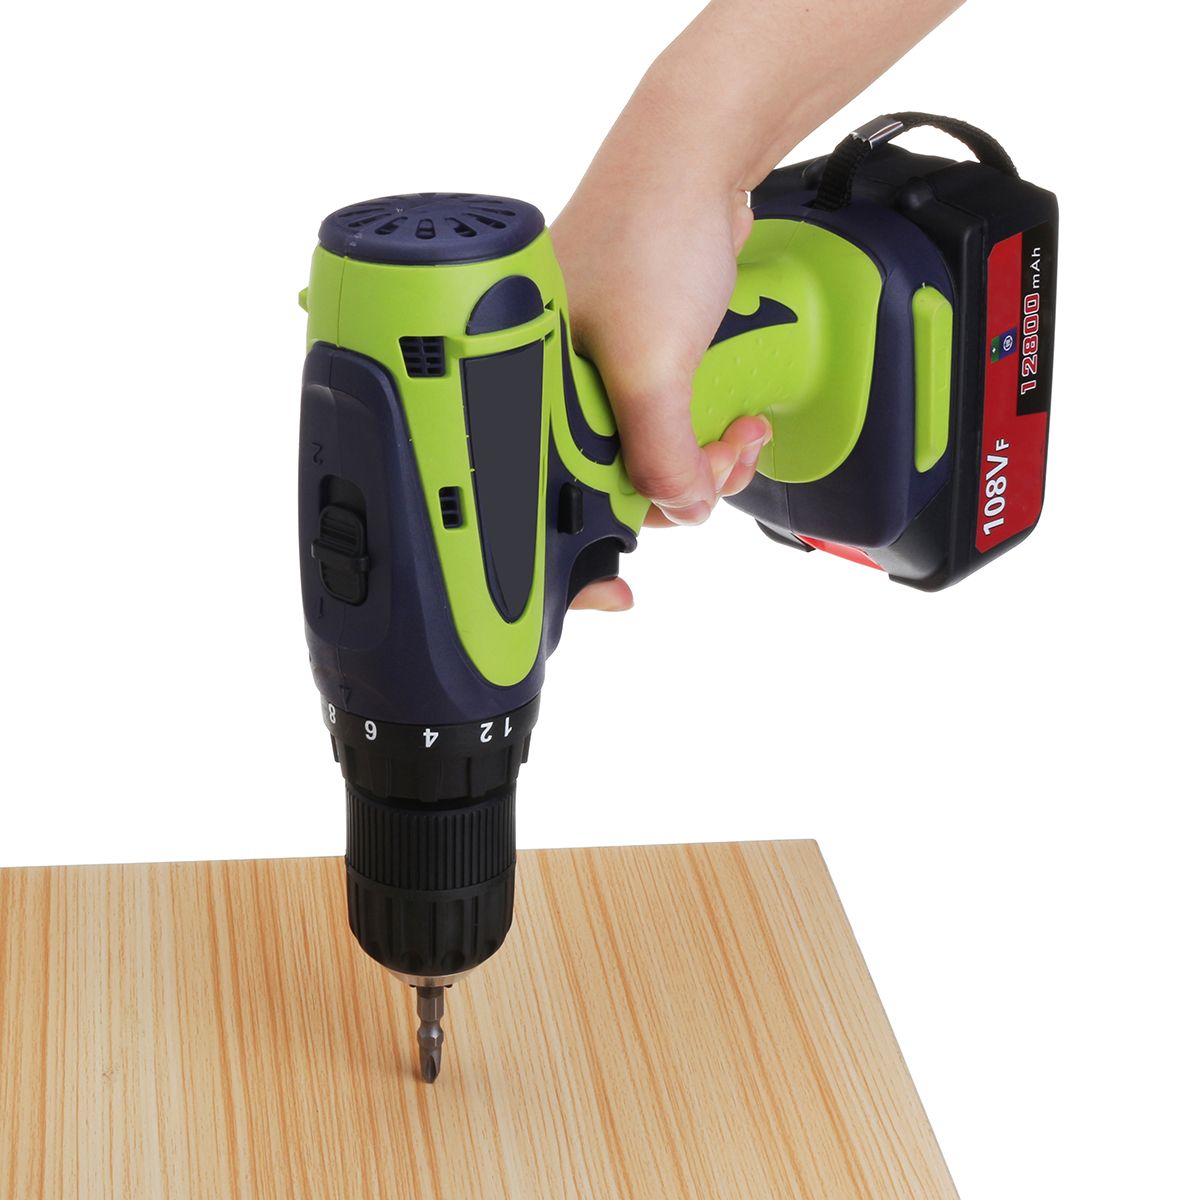 108VF-12800mAh-Dual-Speed-Cordless-Drill-Multifunctional-High-Power-Household-Electric-Drills-W-Acce-1457224